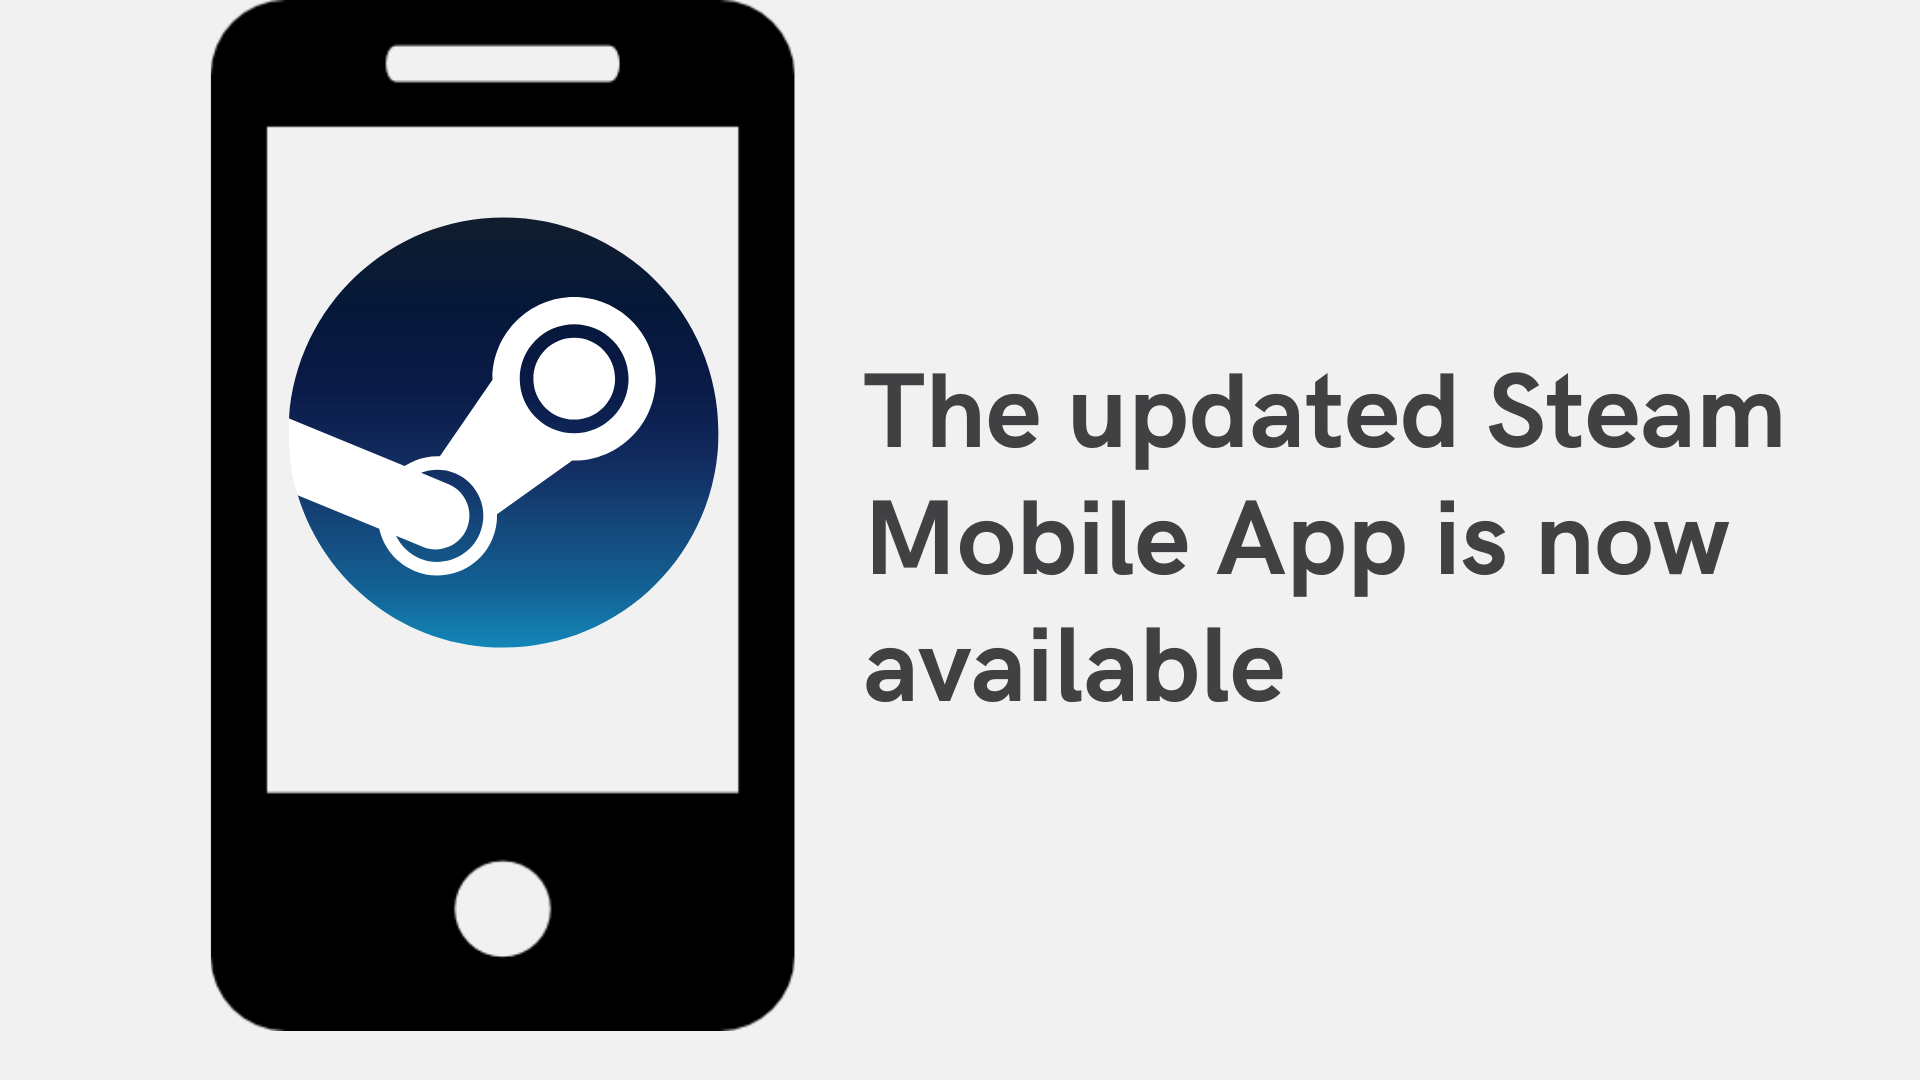 The updated Steam Mobile App is now available